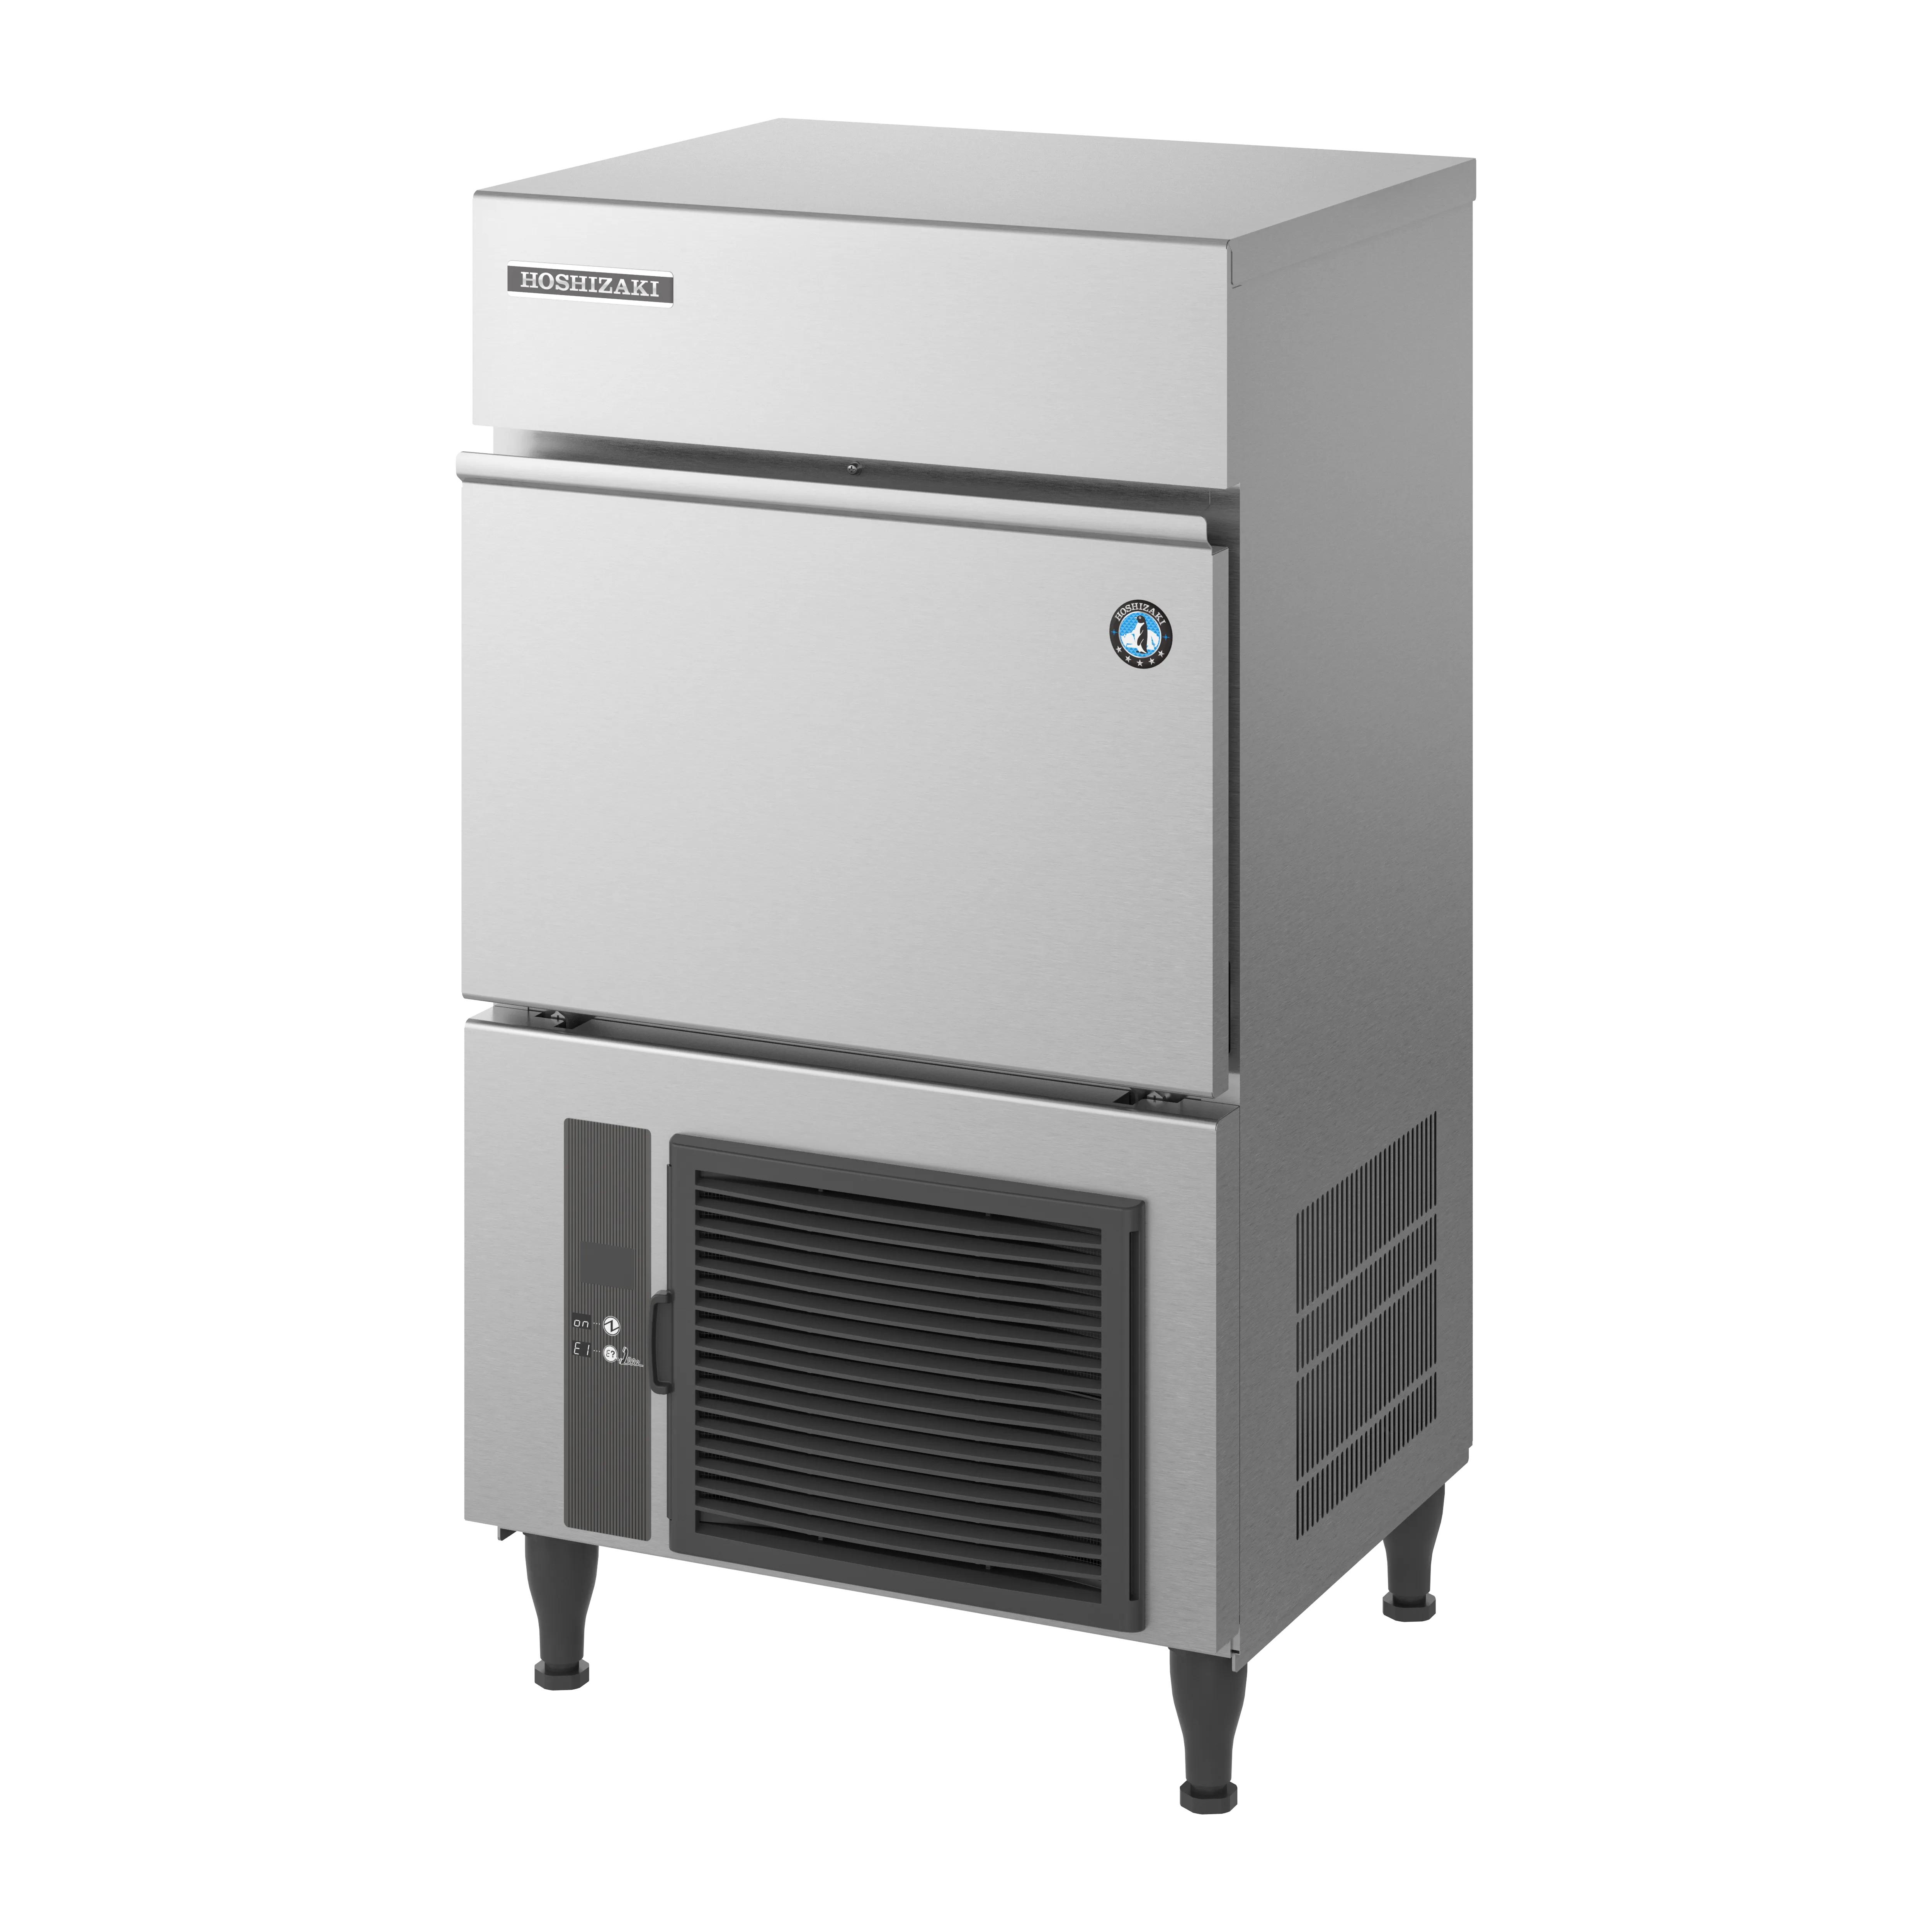 Hoshizaki IM-45WNE-25 Self Contained Cube Ice Maker, 43kg/24hrs